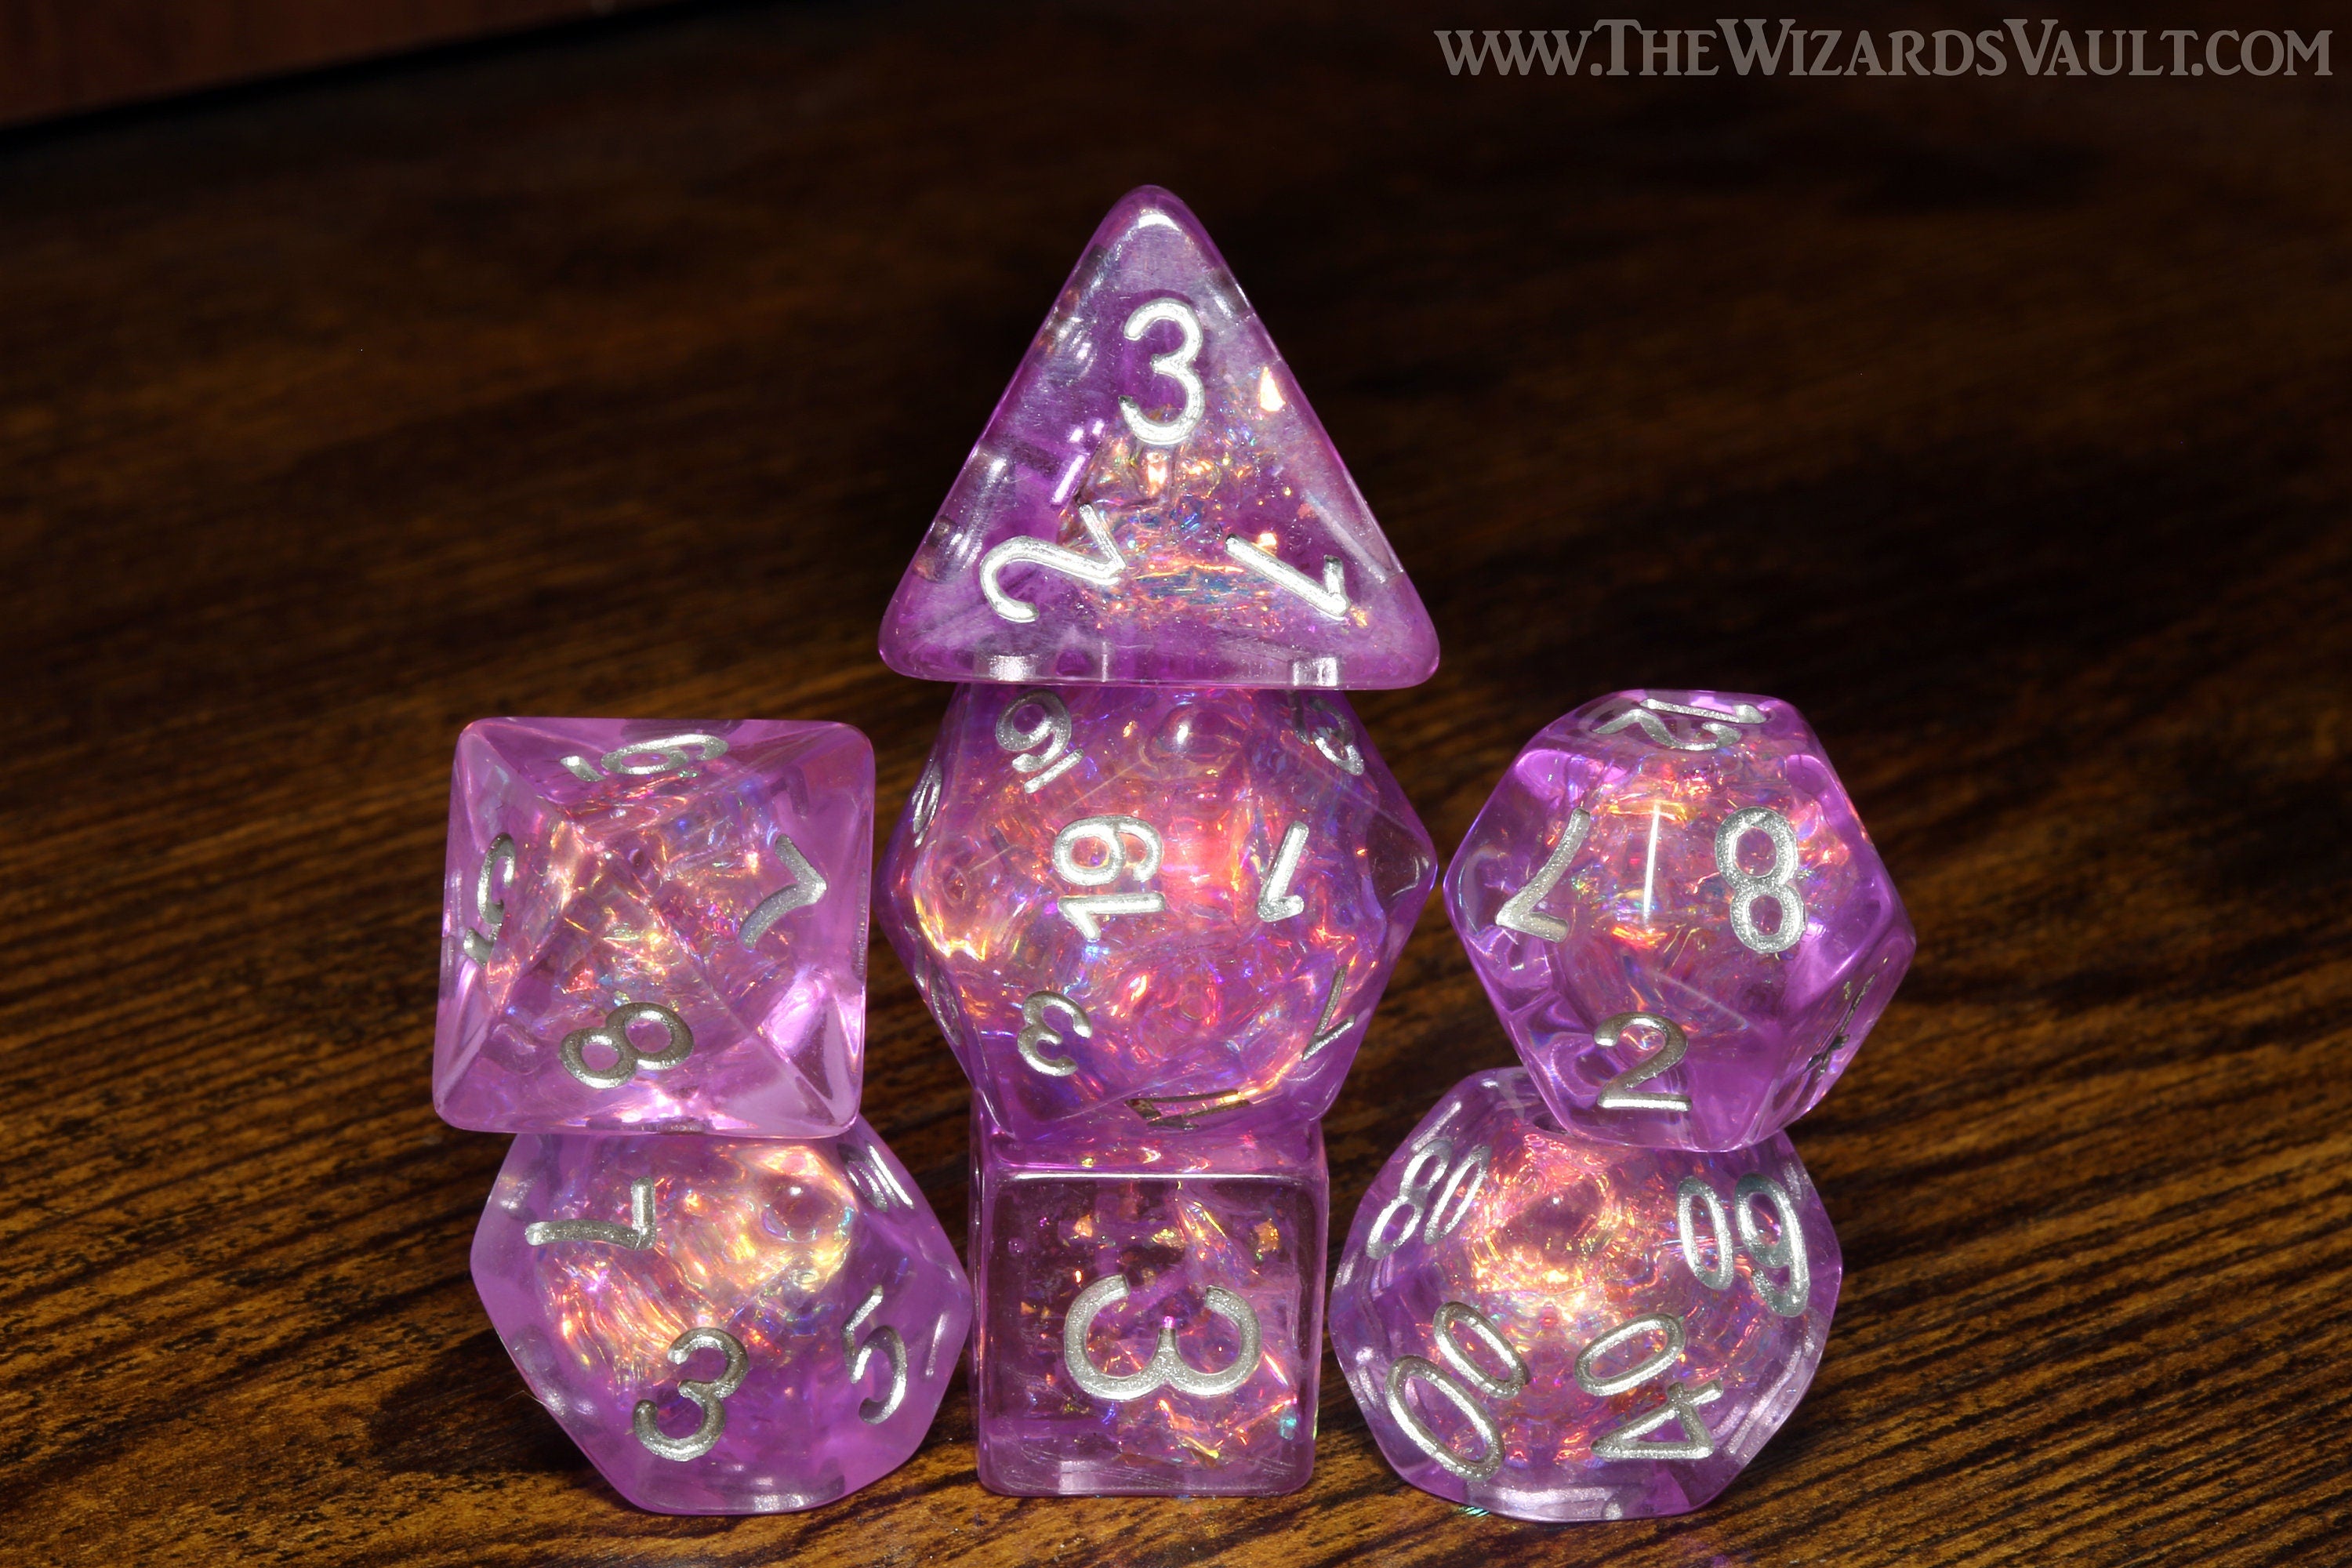 Purple dice set with Holographic inclusions DND Dice, Transparent violet with holo glitter , Role Playing games Dice storage, D&D Dice - The Wizard's Vault